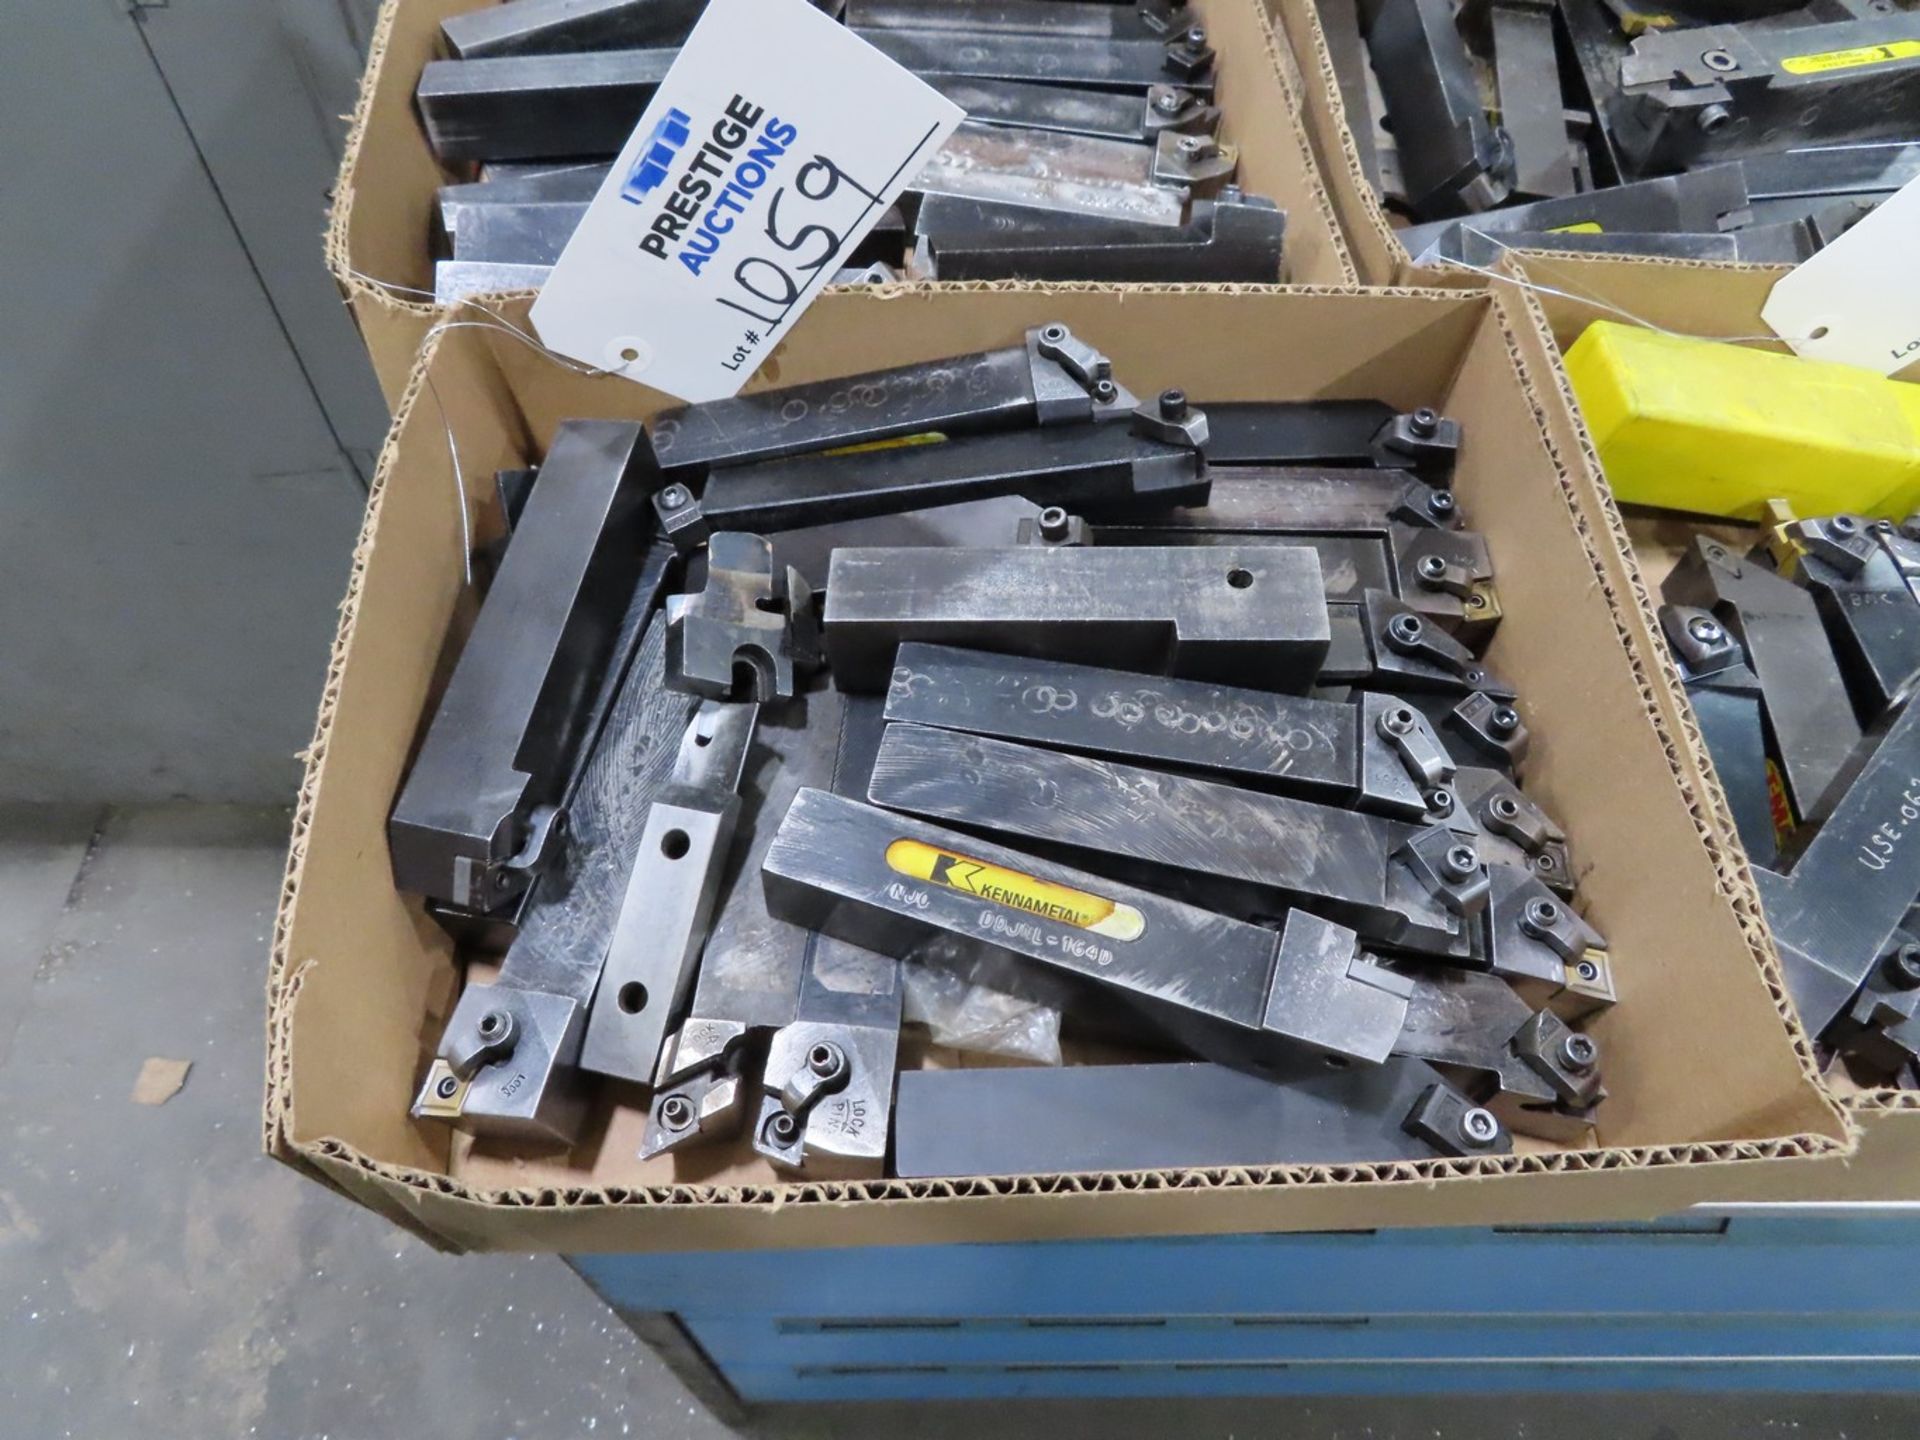 Lot of Assorted Insert Tool Holders